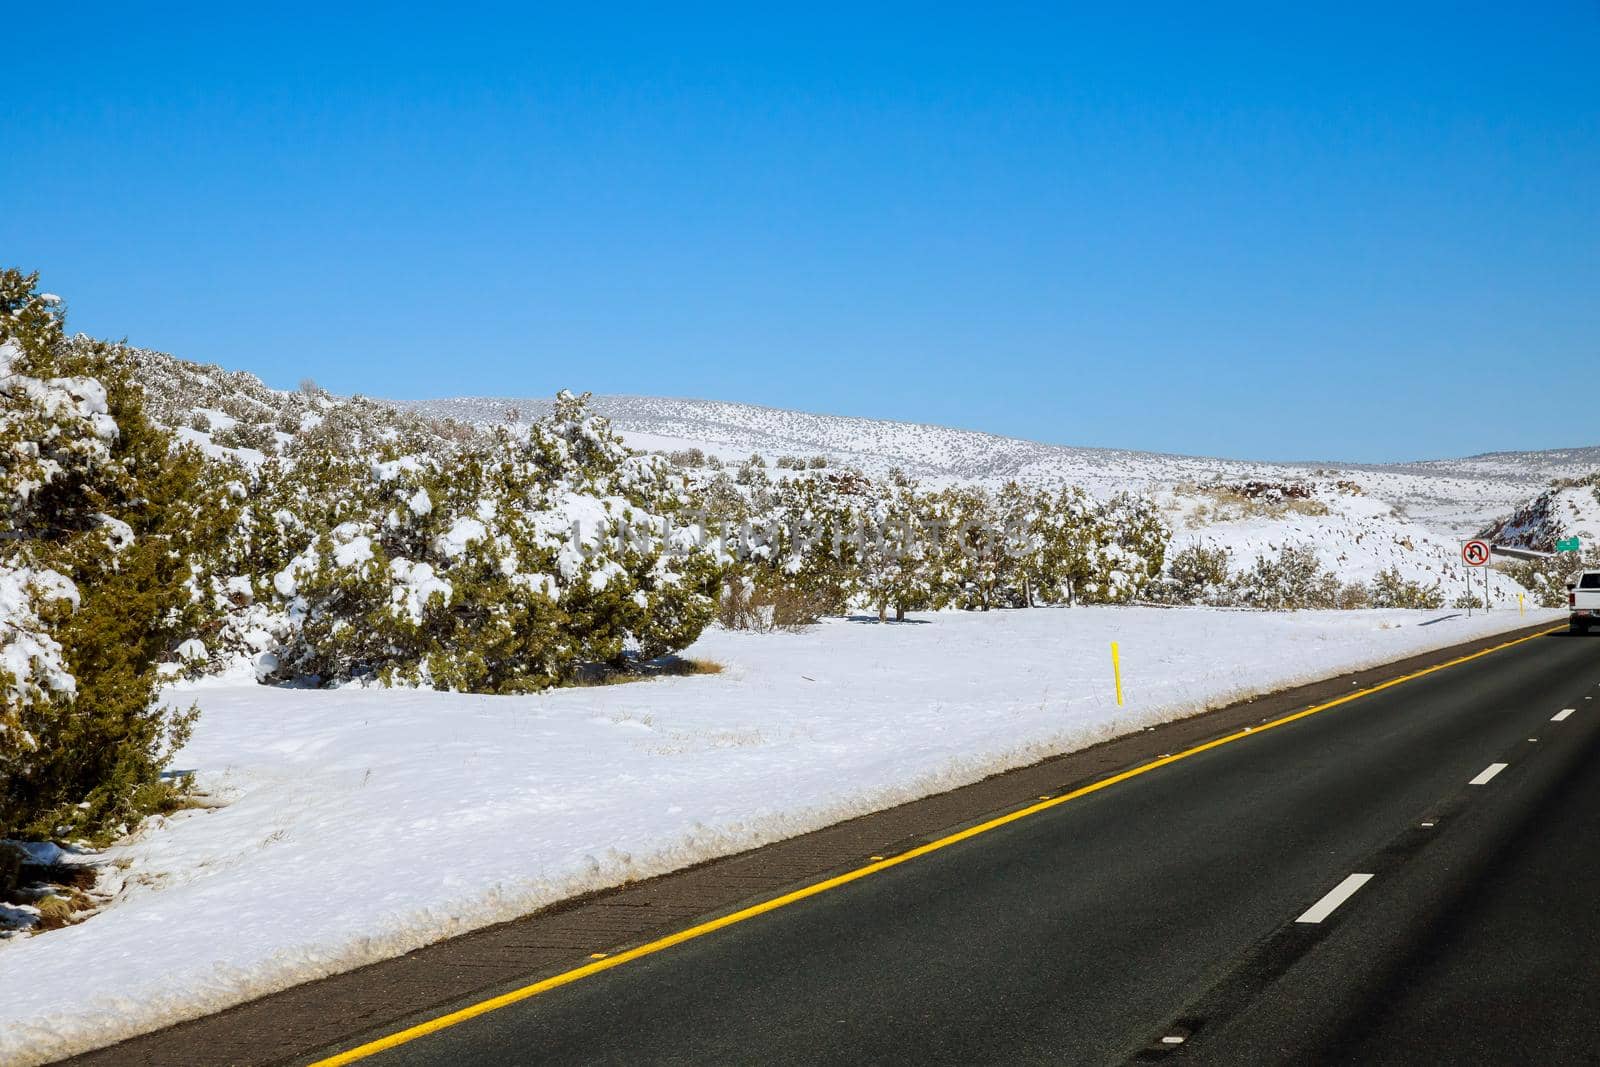 The scenery of a valley after a snowstorm, trees forest snowy road of Interstate 17 in Arizona by ungvar